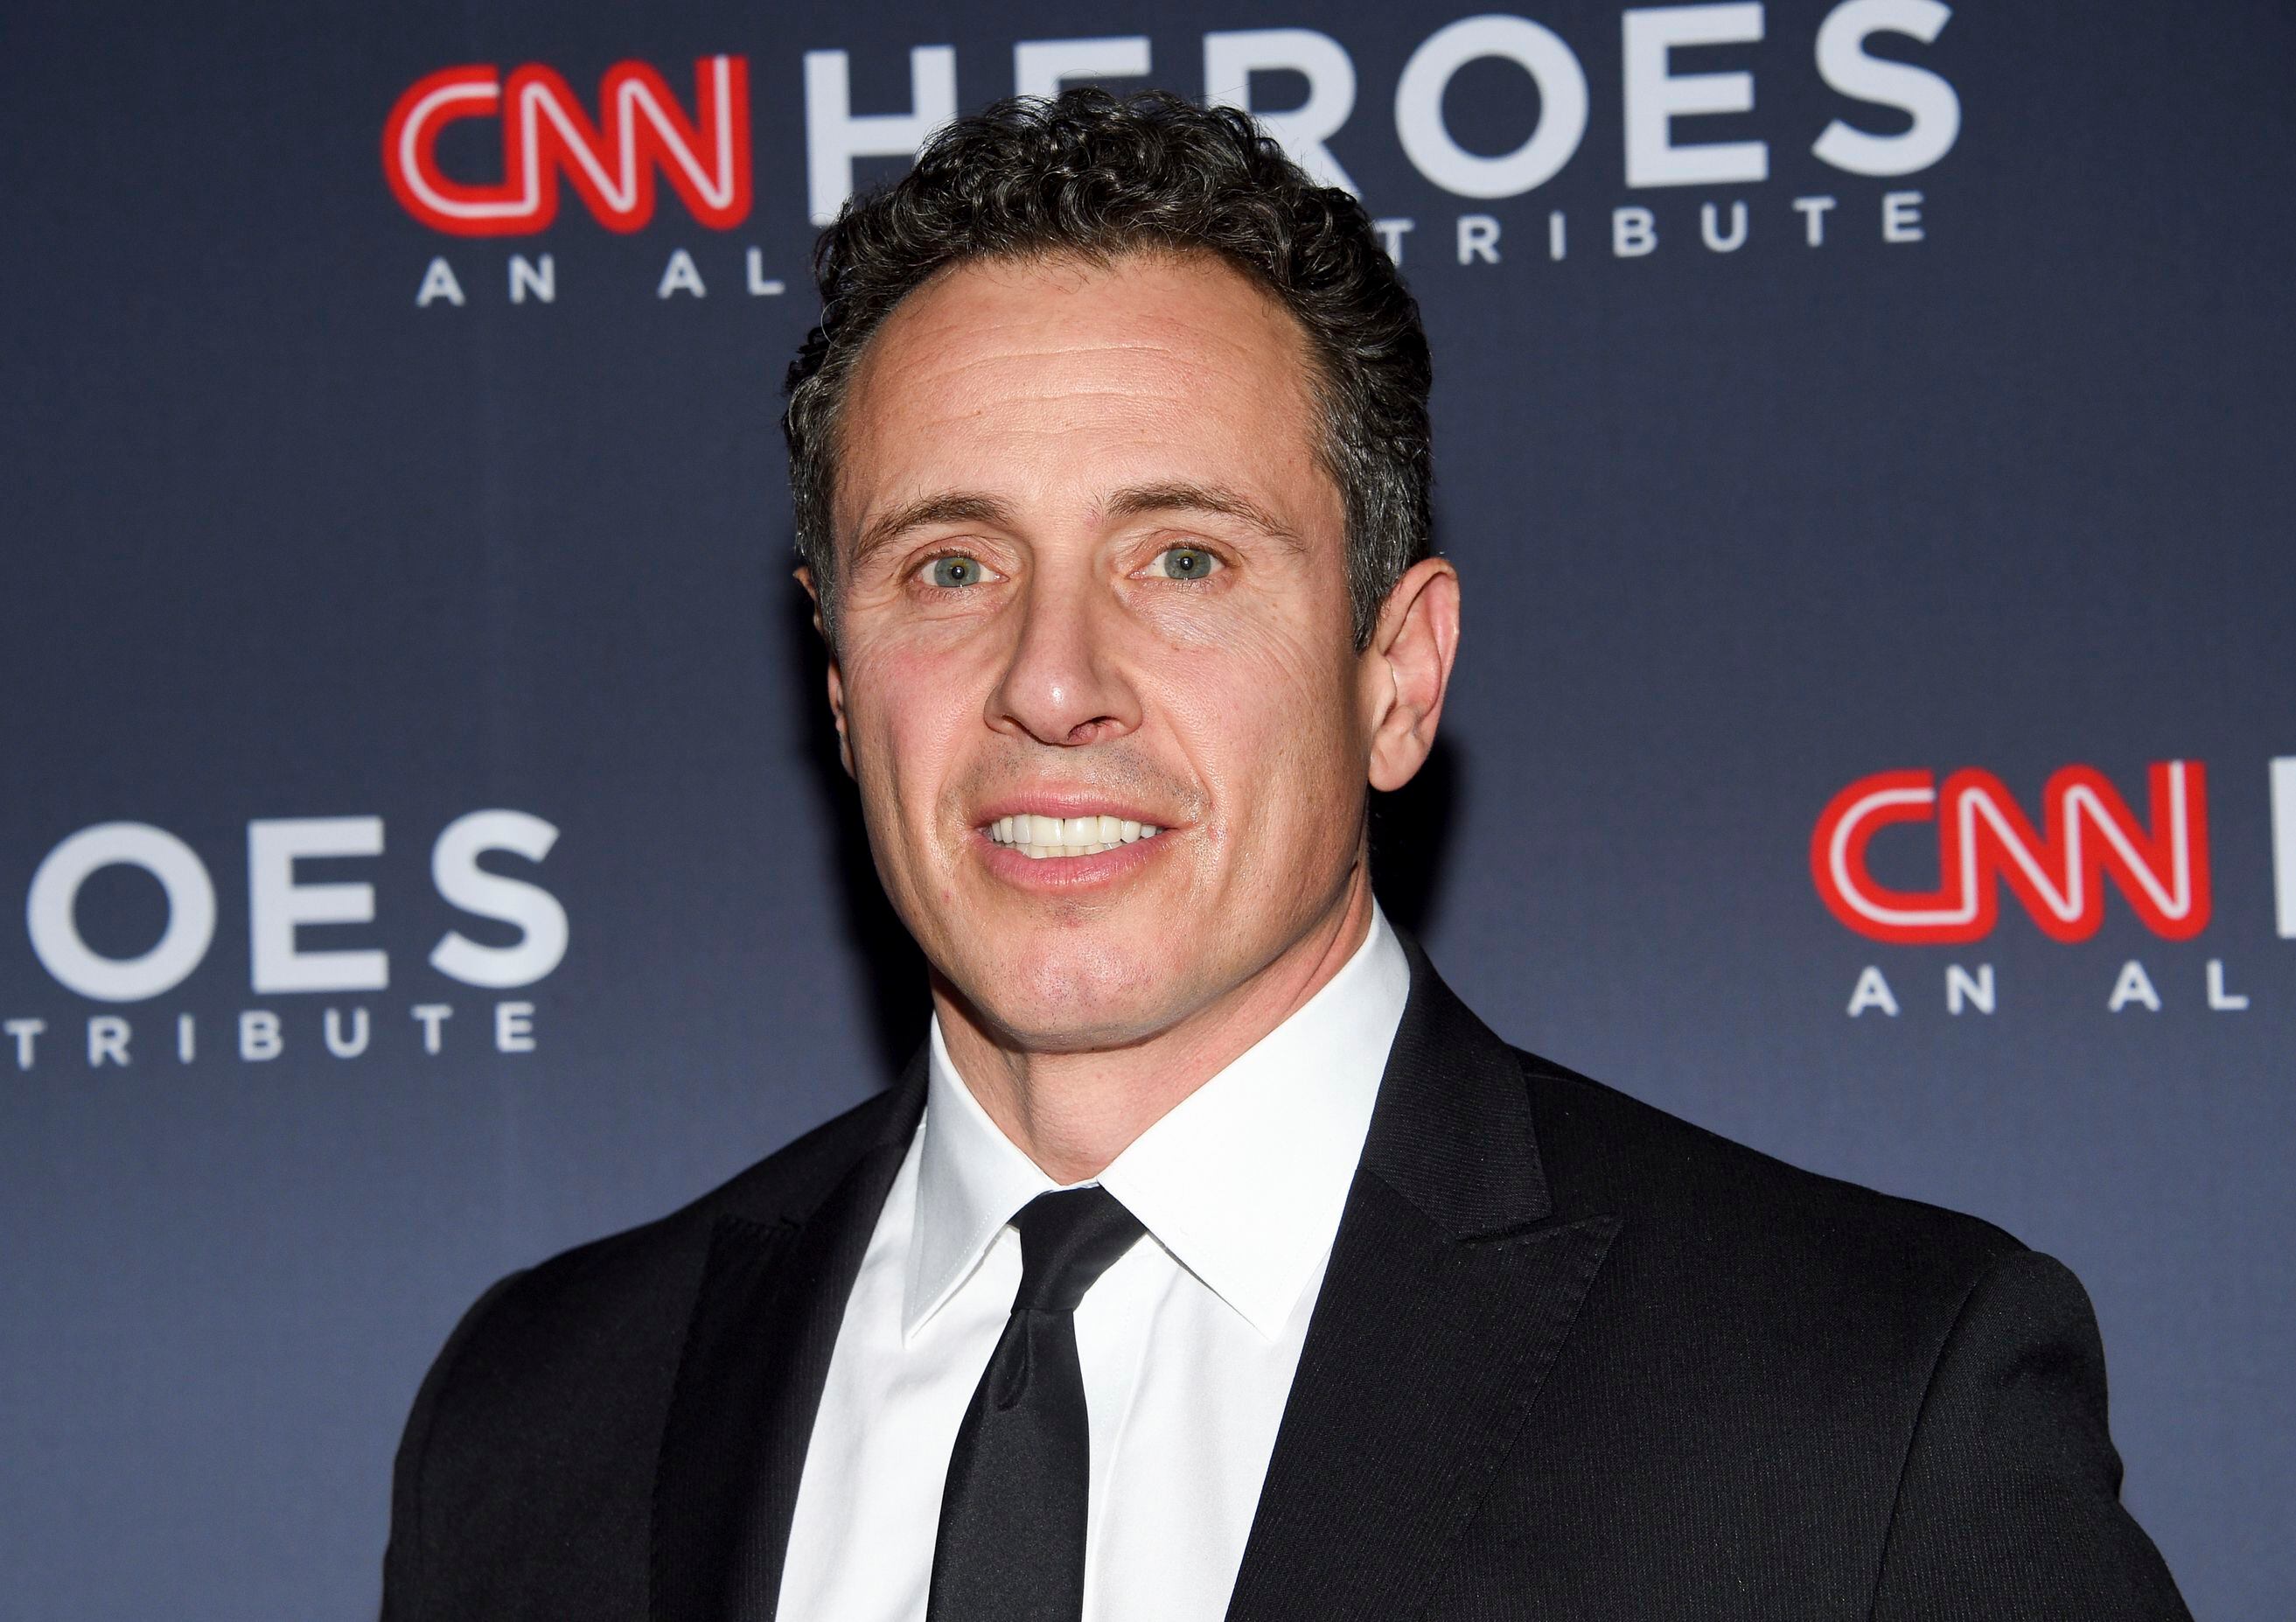 NY report details CNN’s Chris Cuomo’s role advising brother